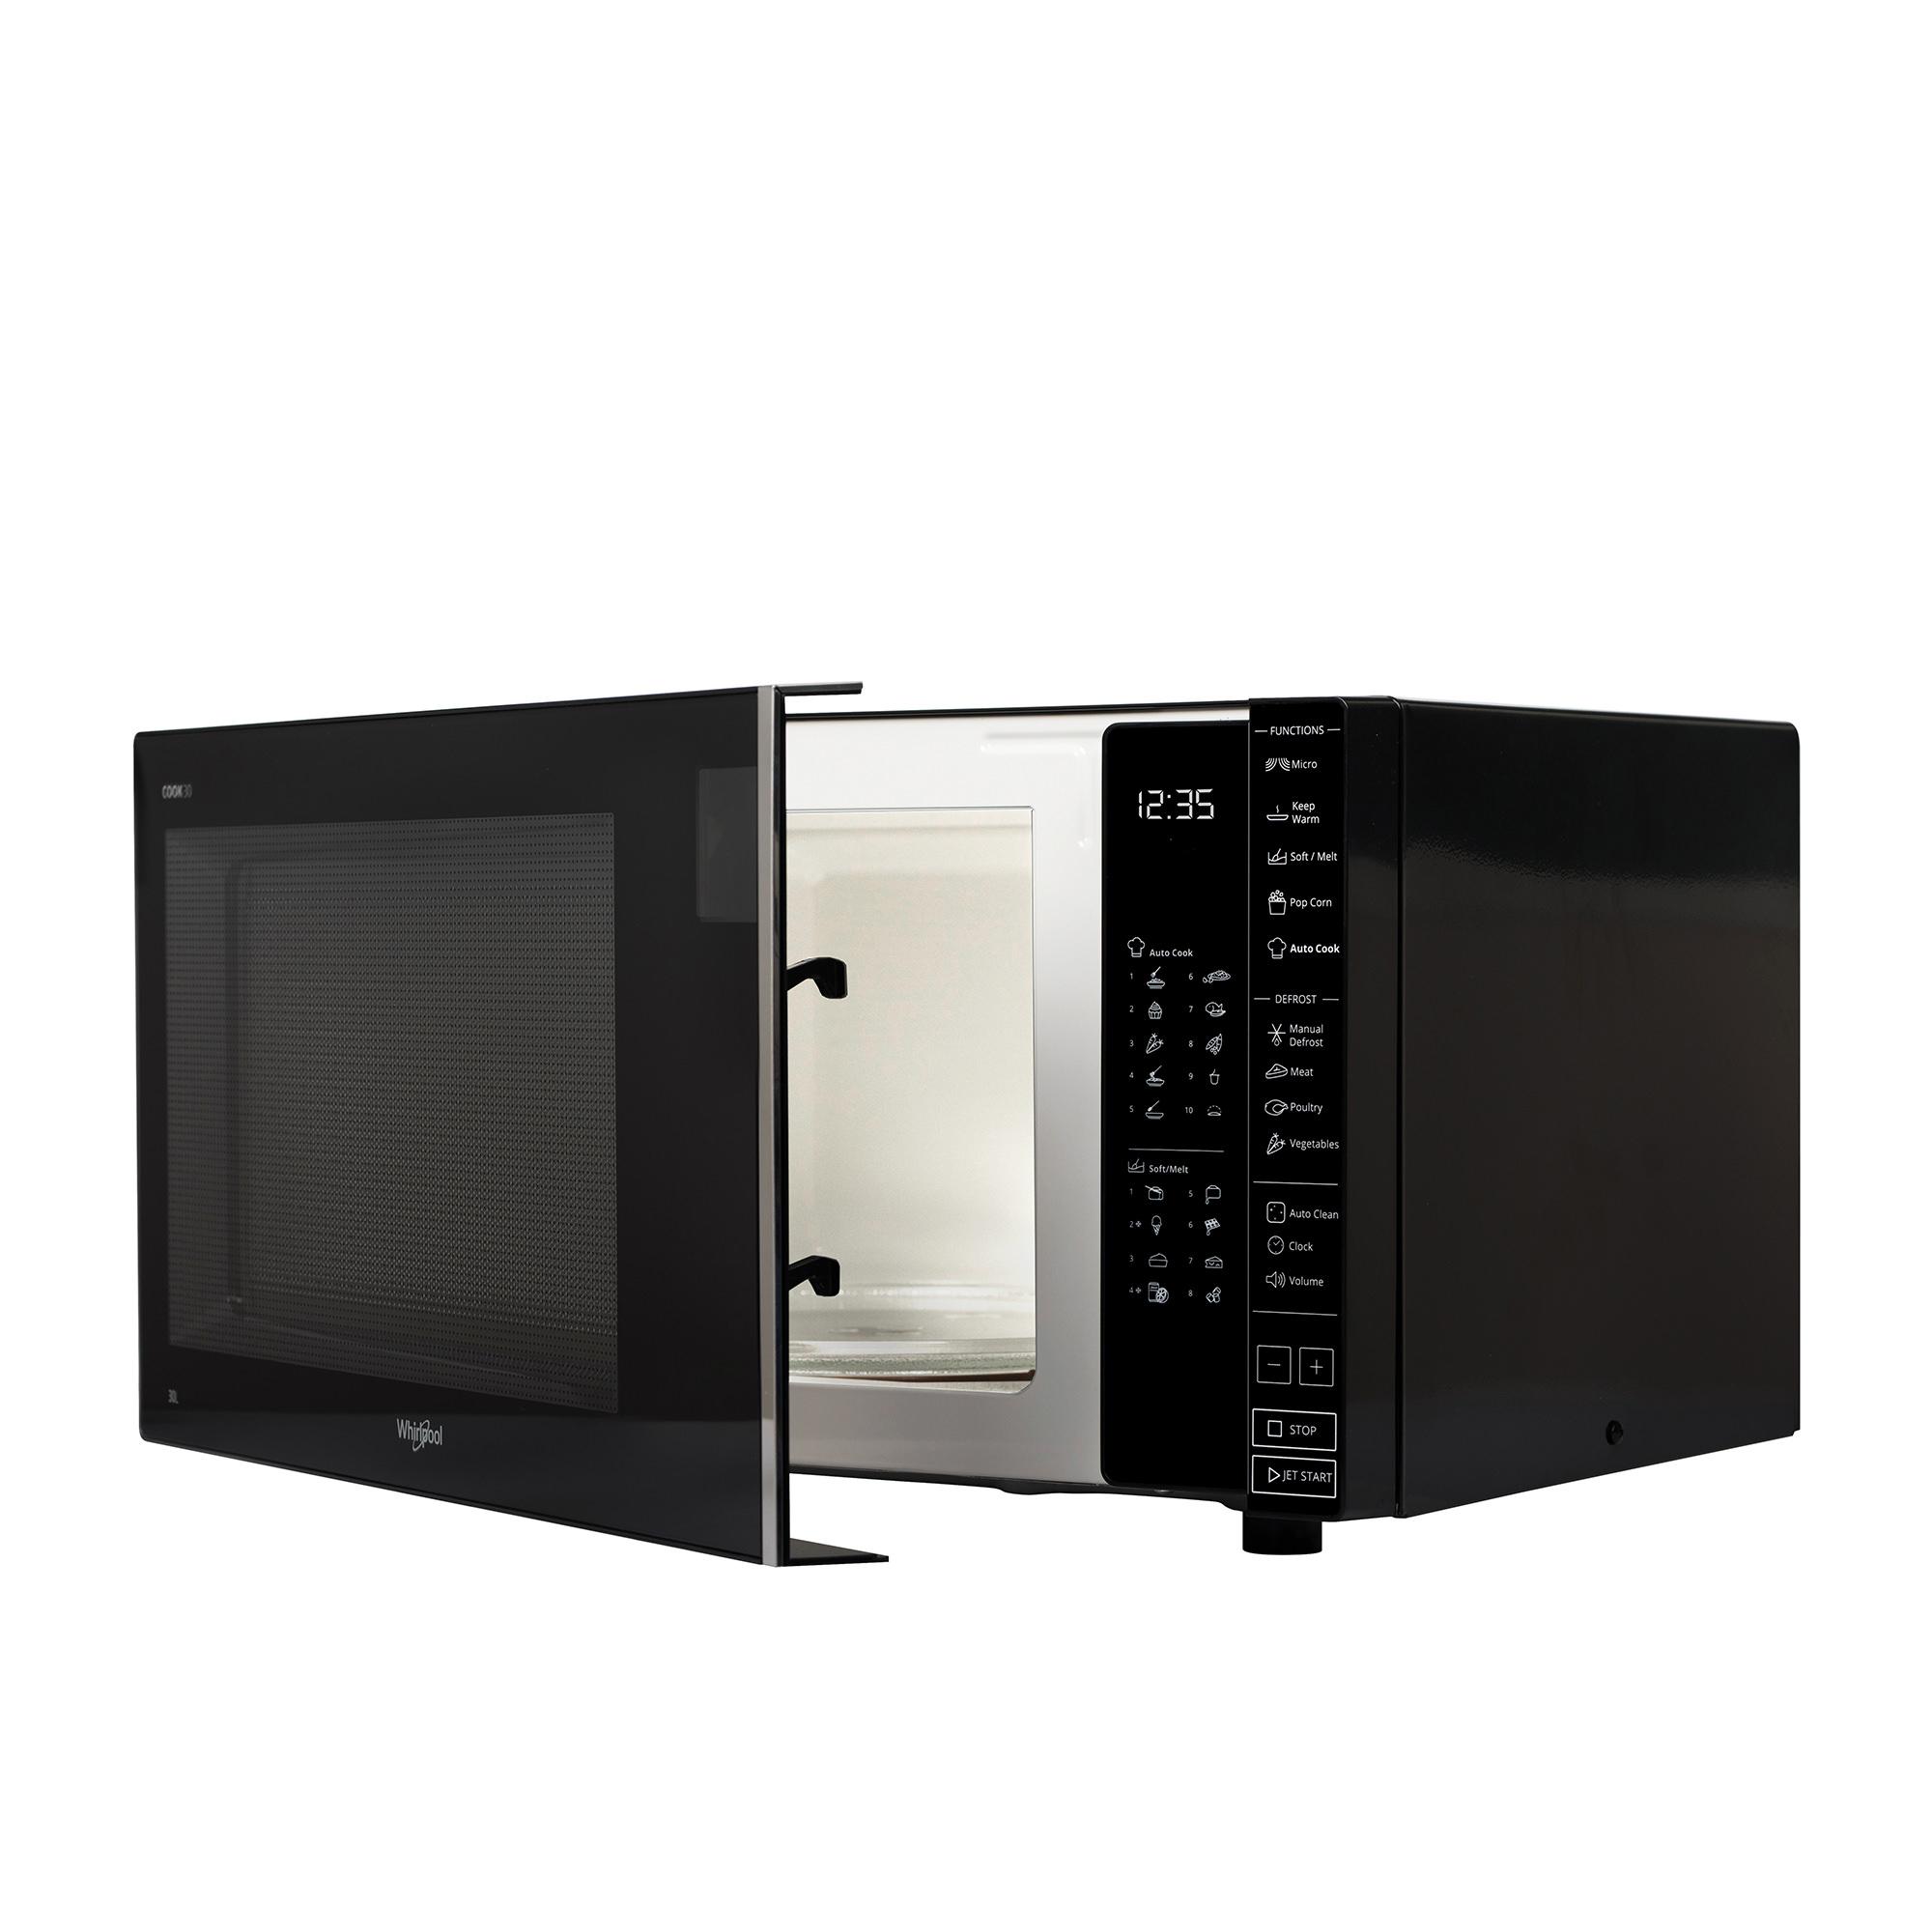 Whirlpool Microwave Oven 30L Black Image 3